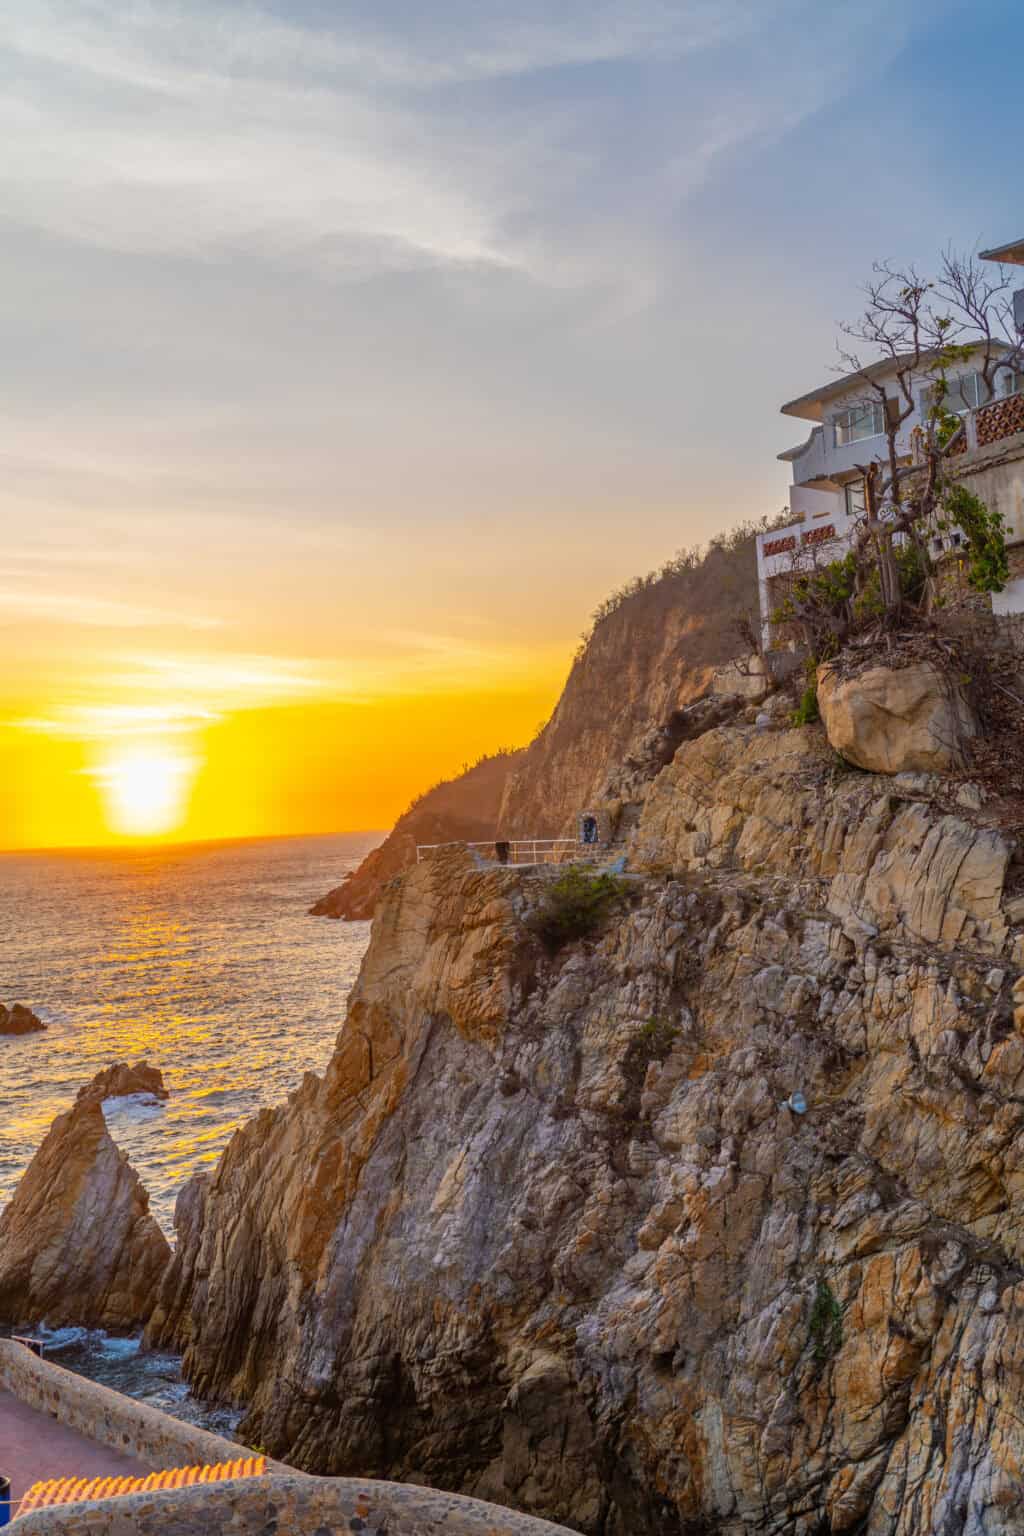 a house on a cliff by the ocean